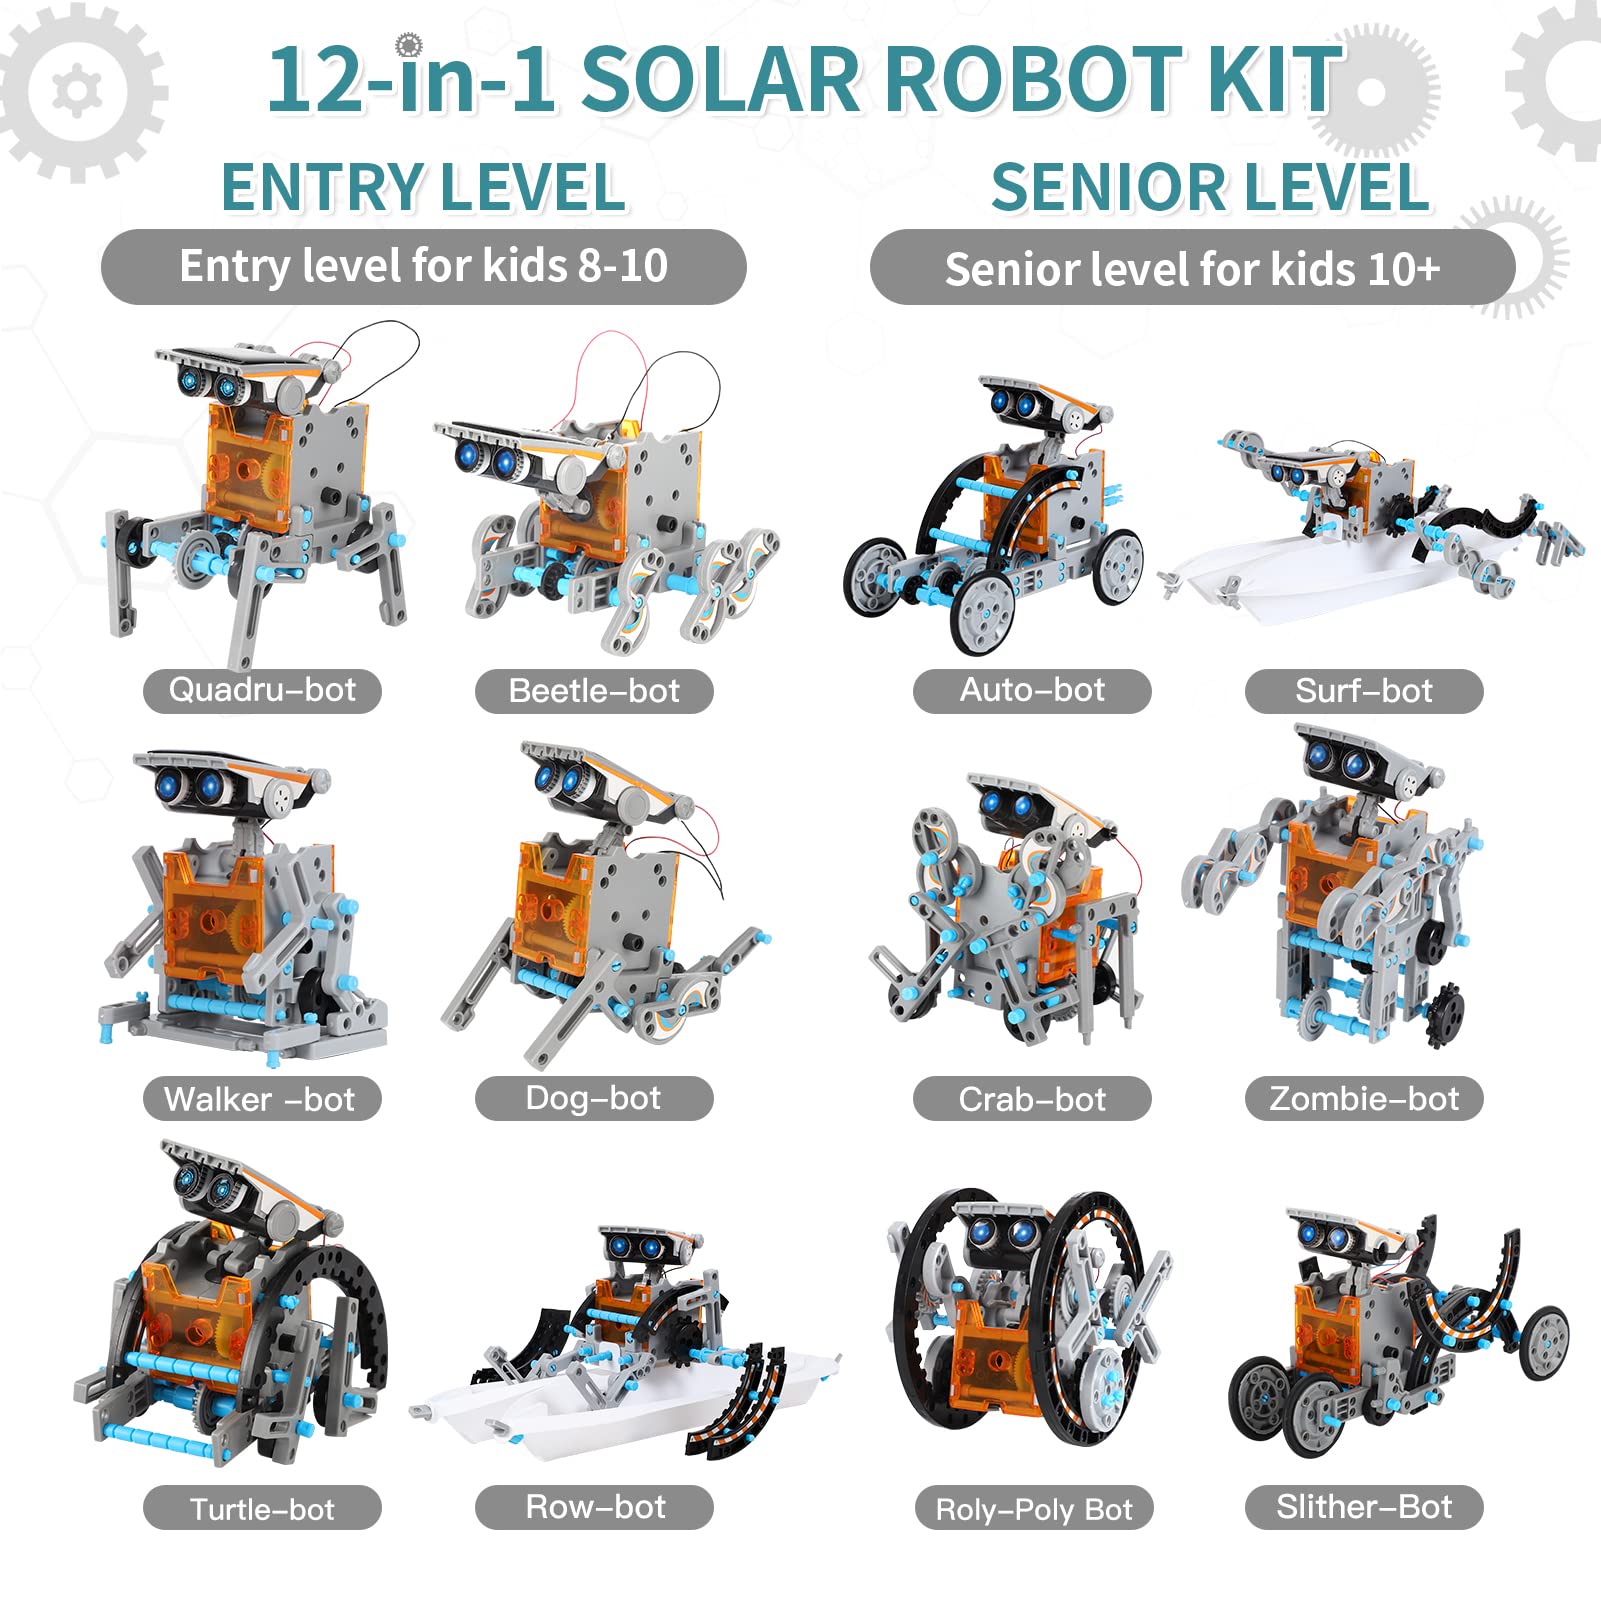 Lucky Doug 12-in-1 STEM Solar Robot Kit Toys Gifts for Kids 8 9 10 11 12 13 Years Old, Educational Building Science Experiment Set Birthday for Kids Boys Girls